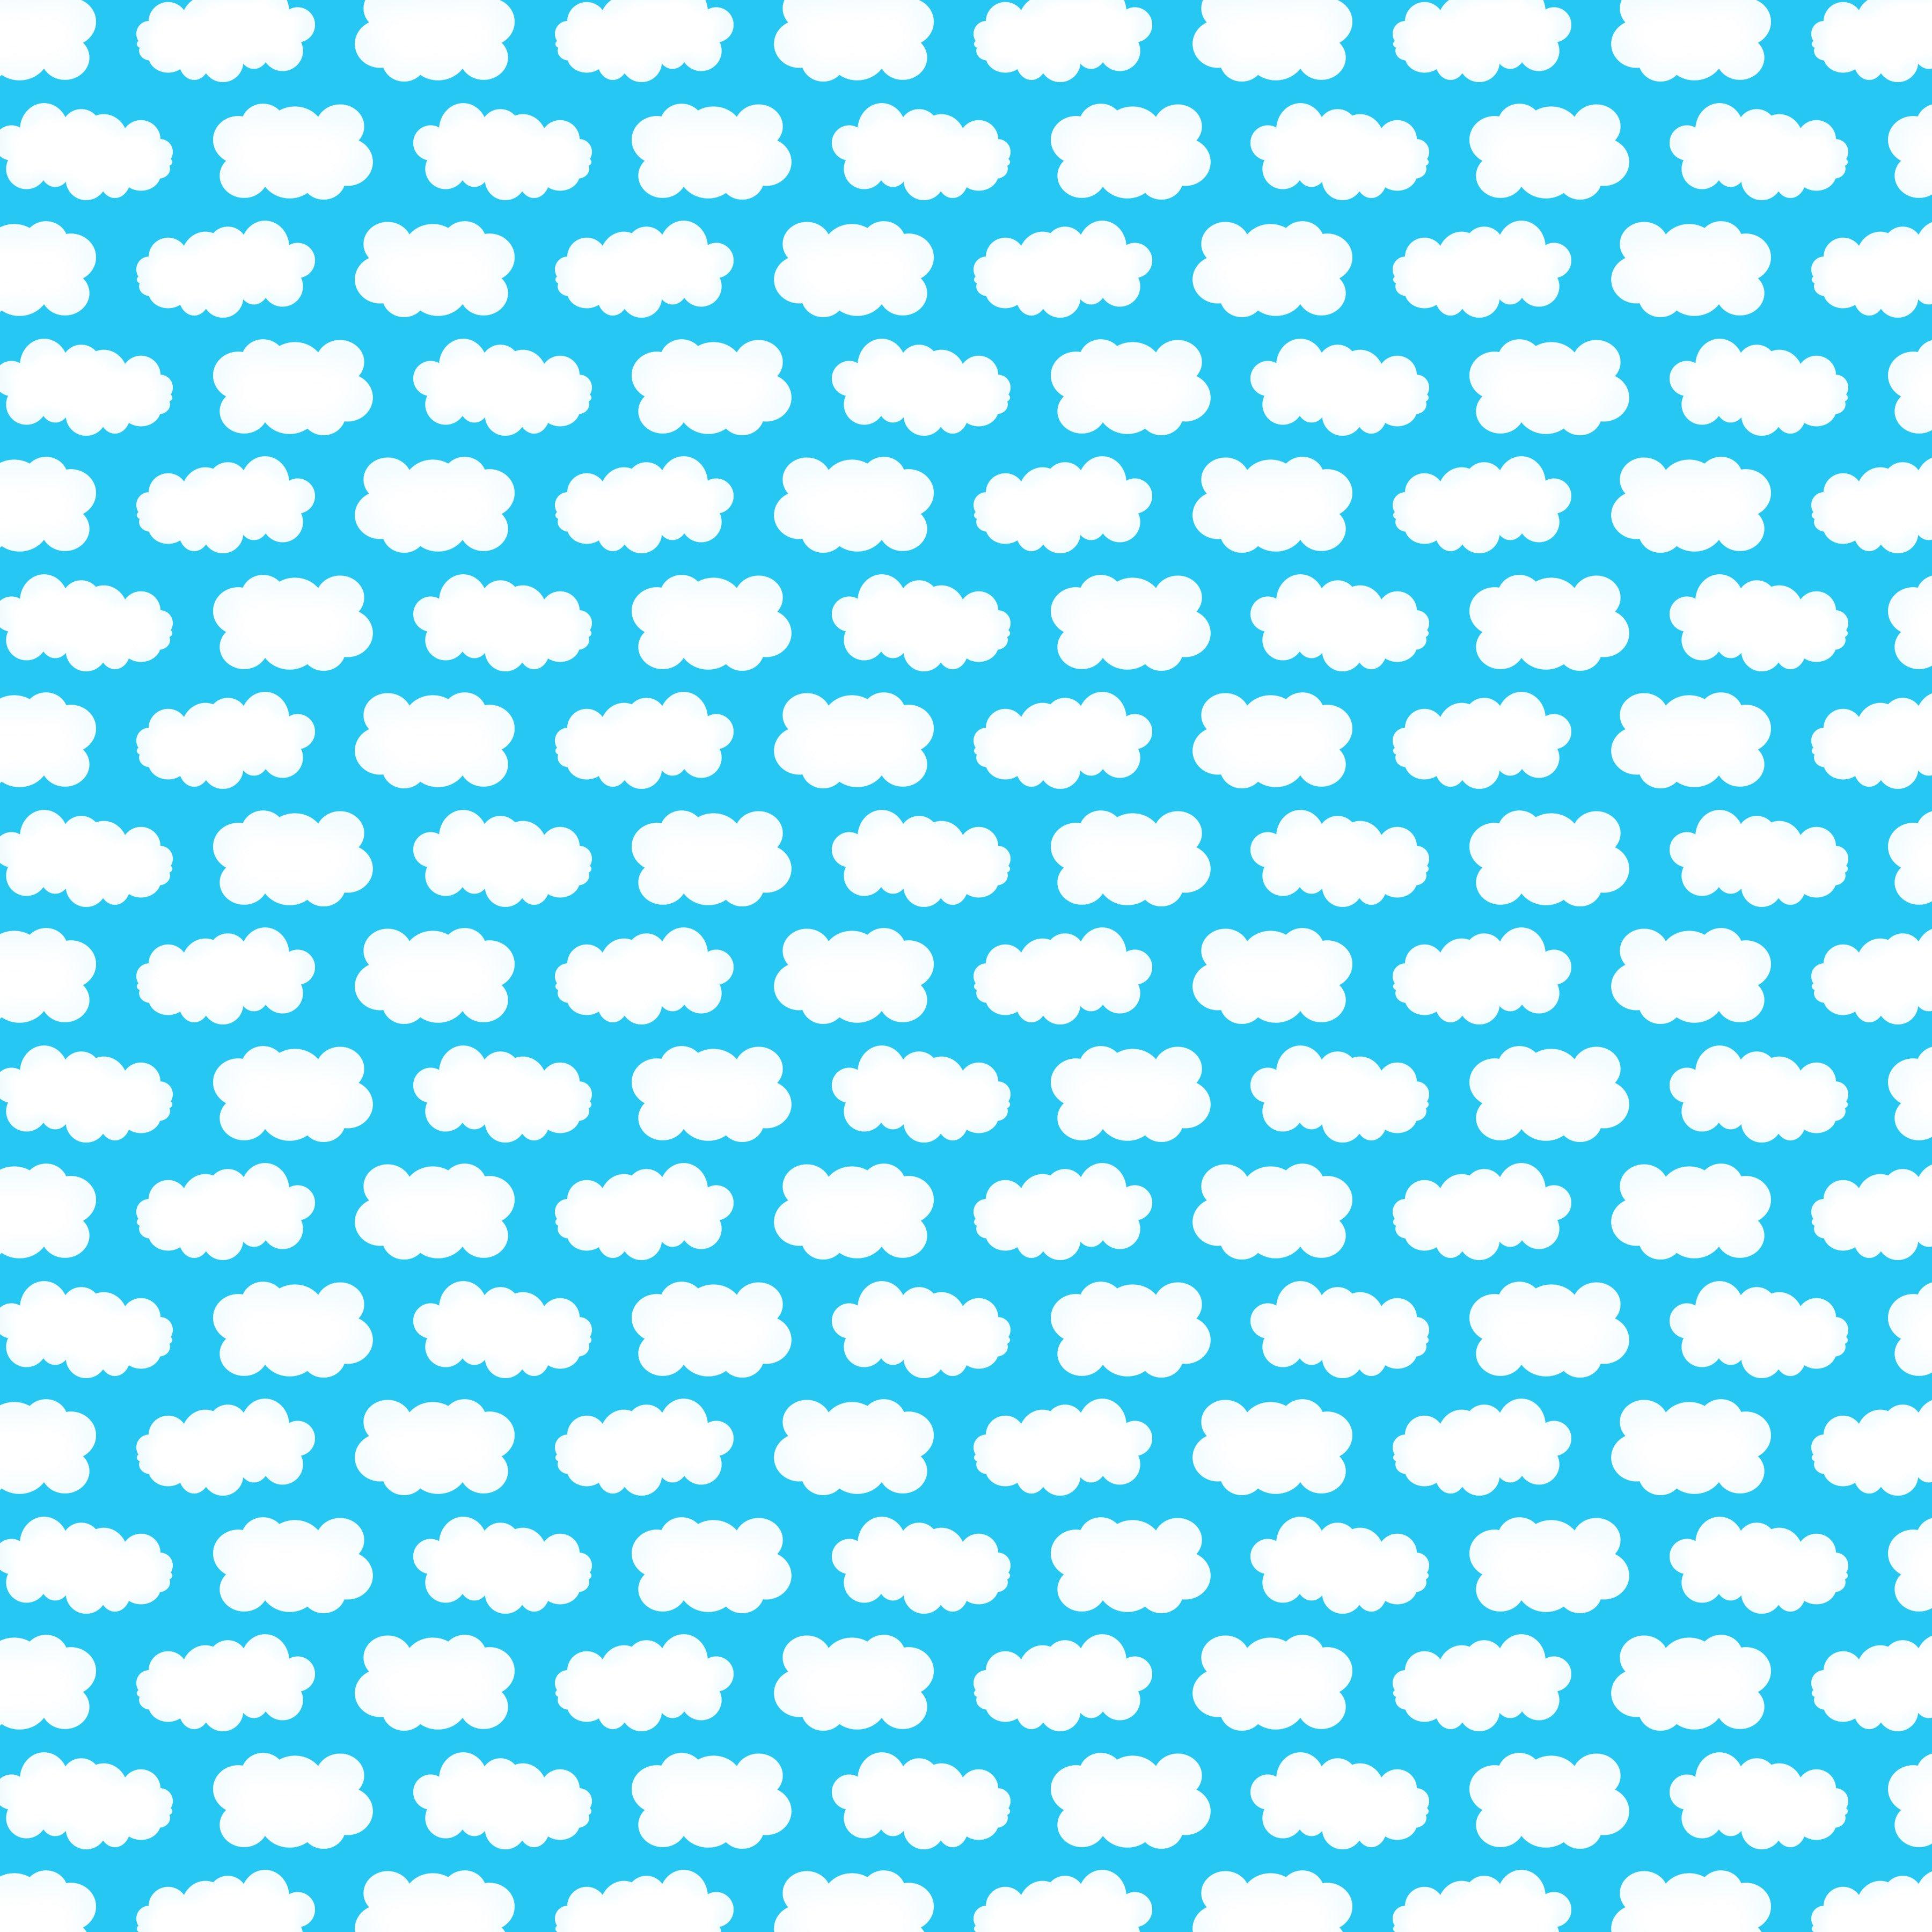 Bounce House Collection Blue Skies & Sunshine 12 x 12 Double-Sided Scrapbook Paper by SSC Designs - Scrapbook Supply Companies